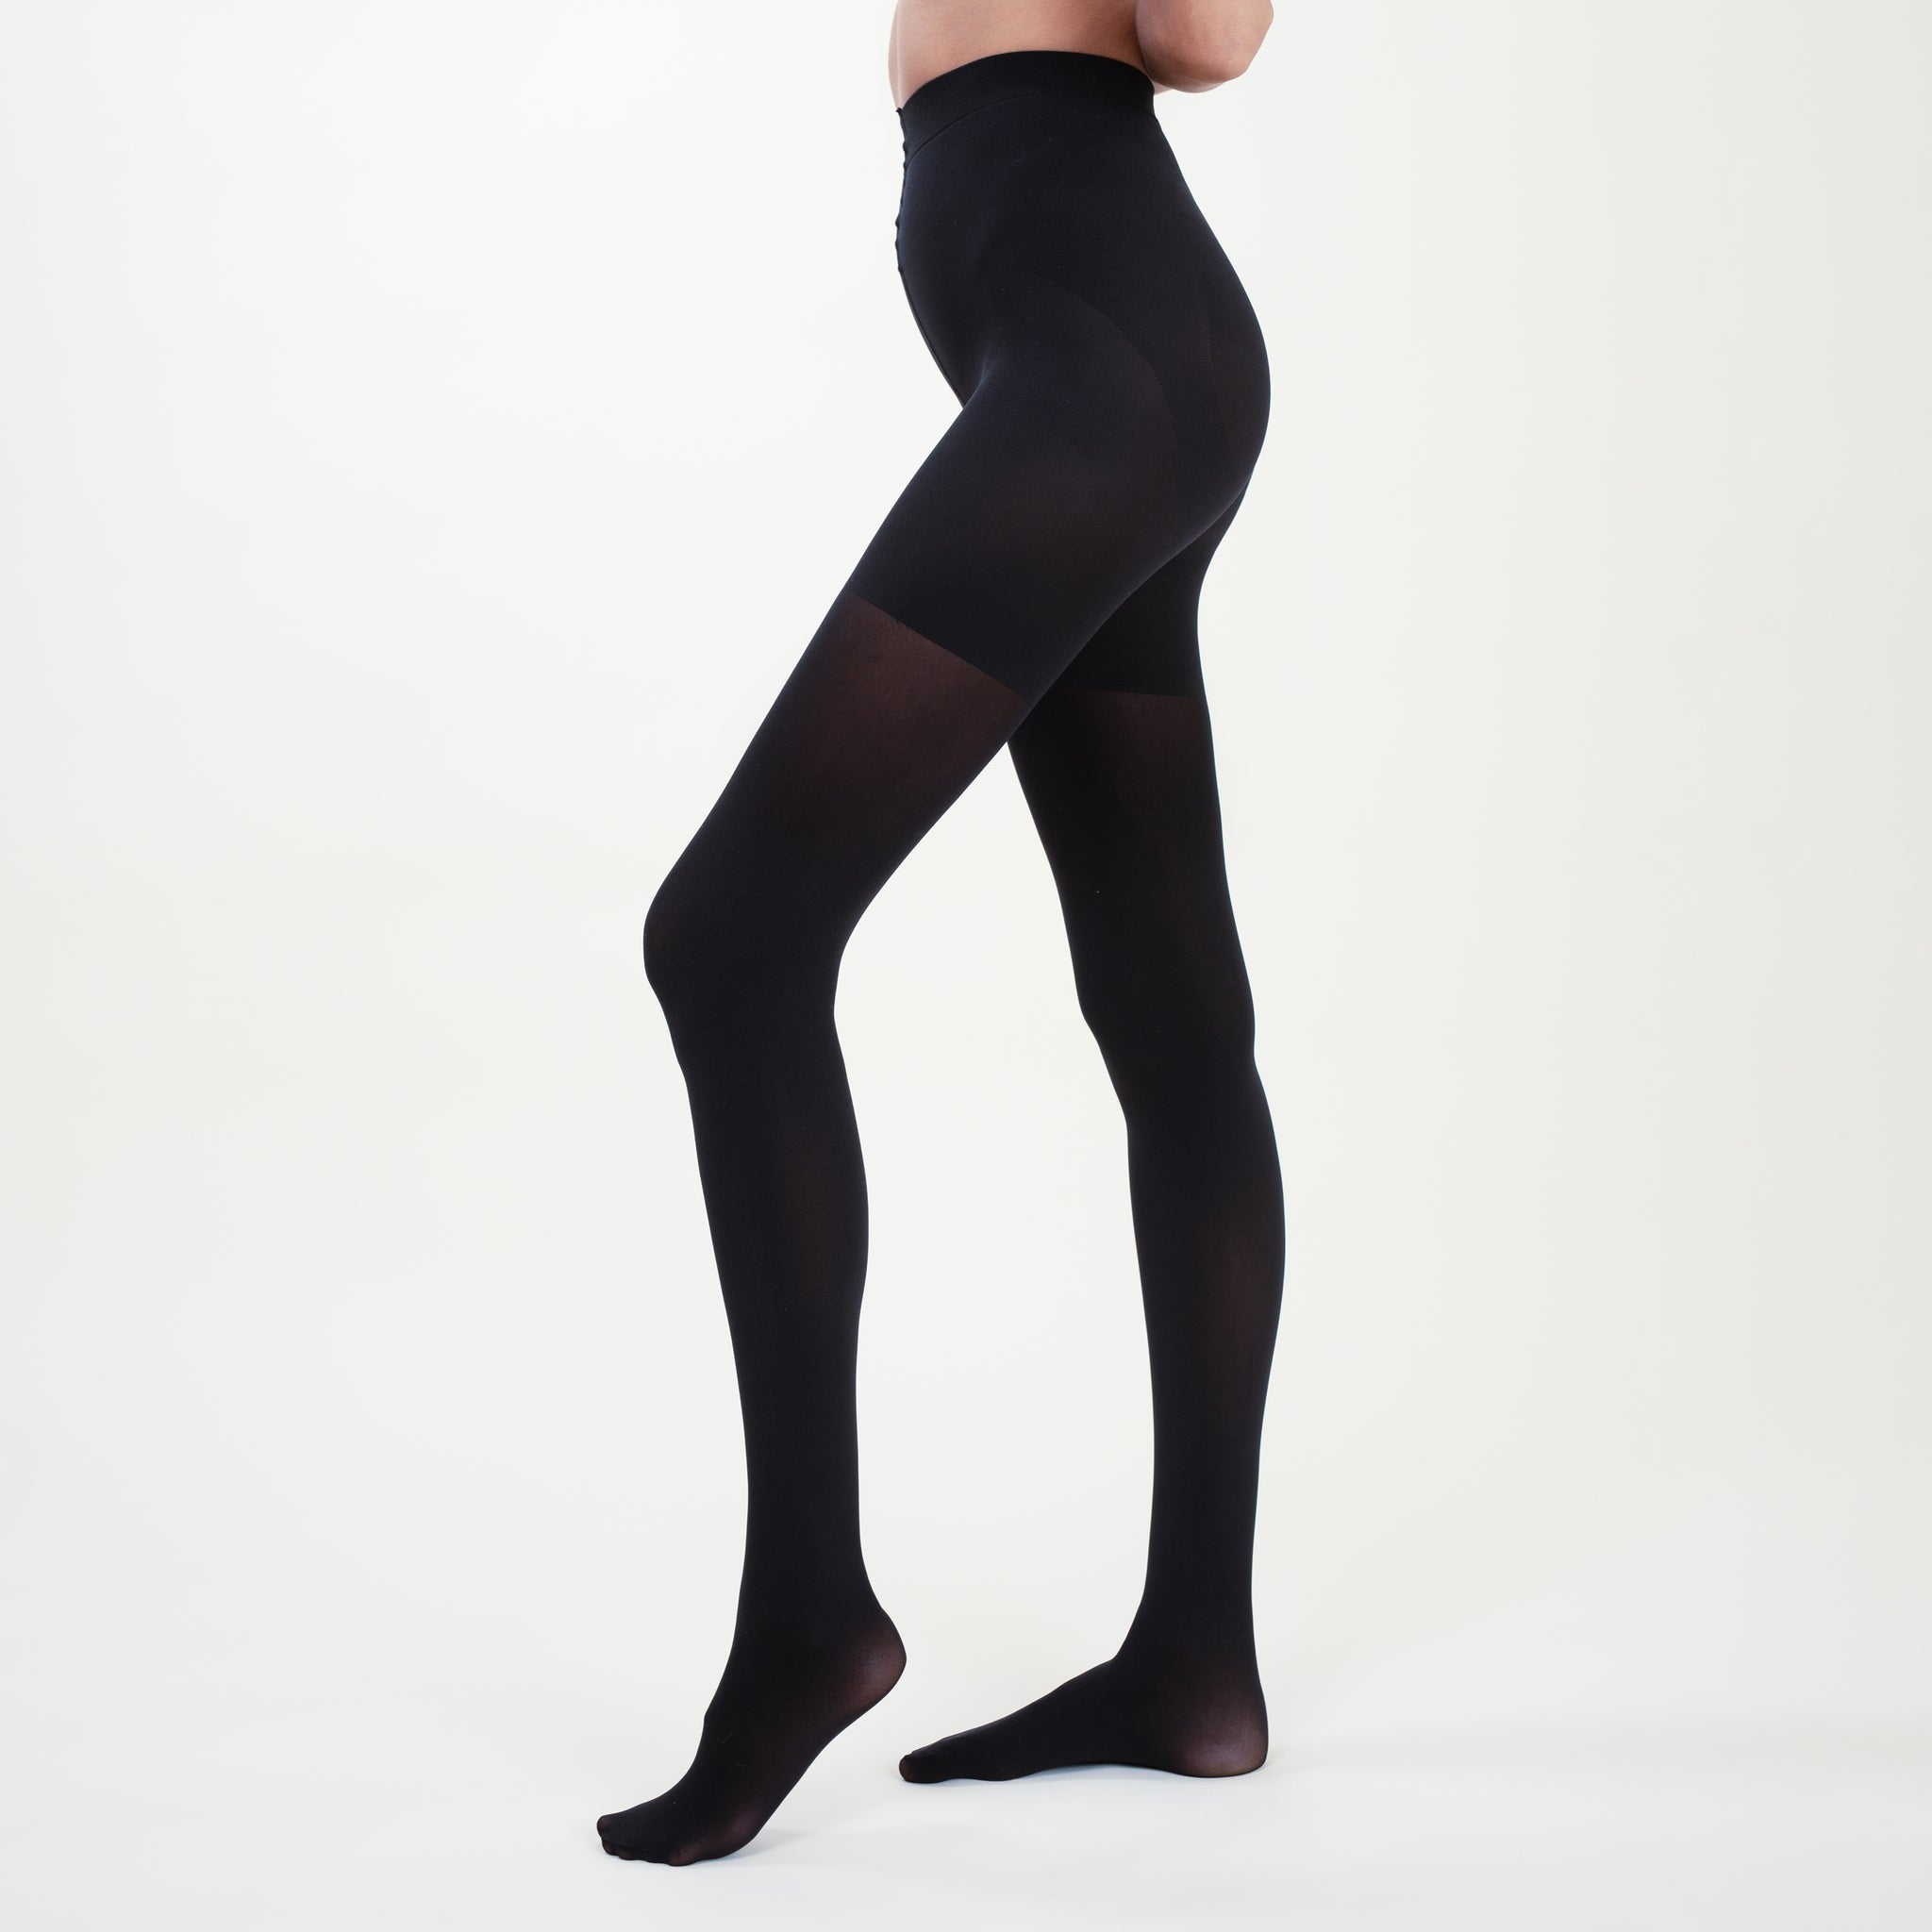 Side image of a woman standing wearing the Threads Opaque Tights in Black